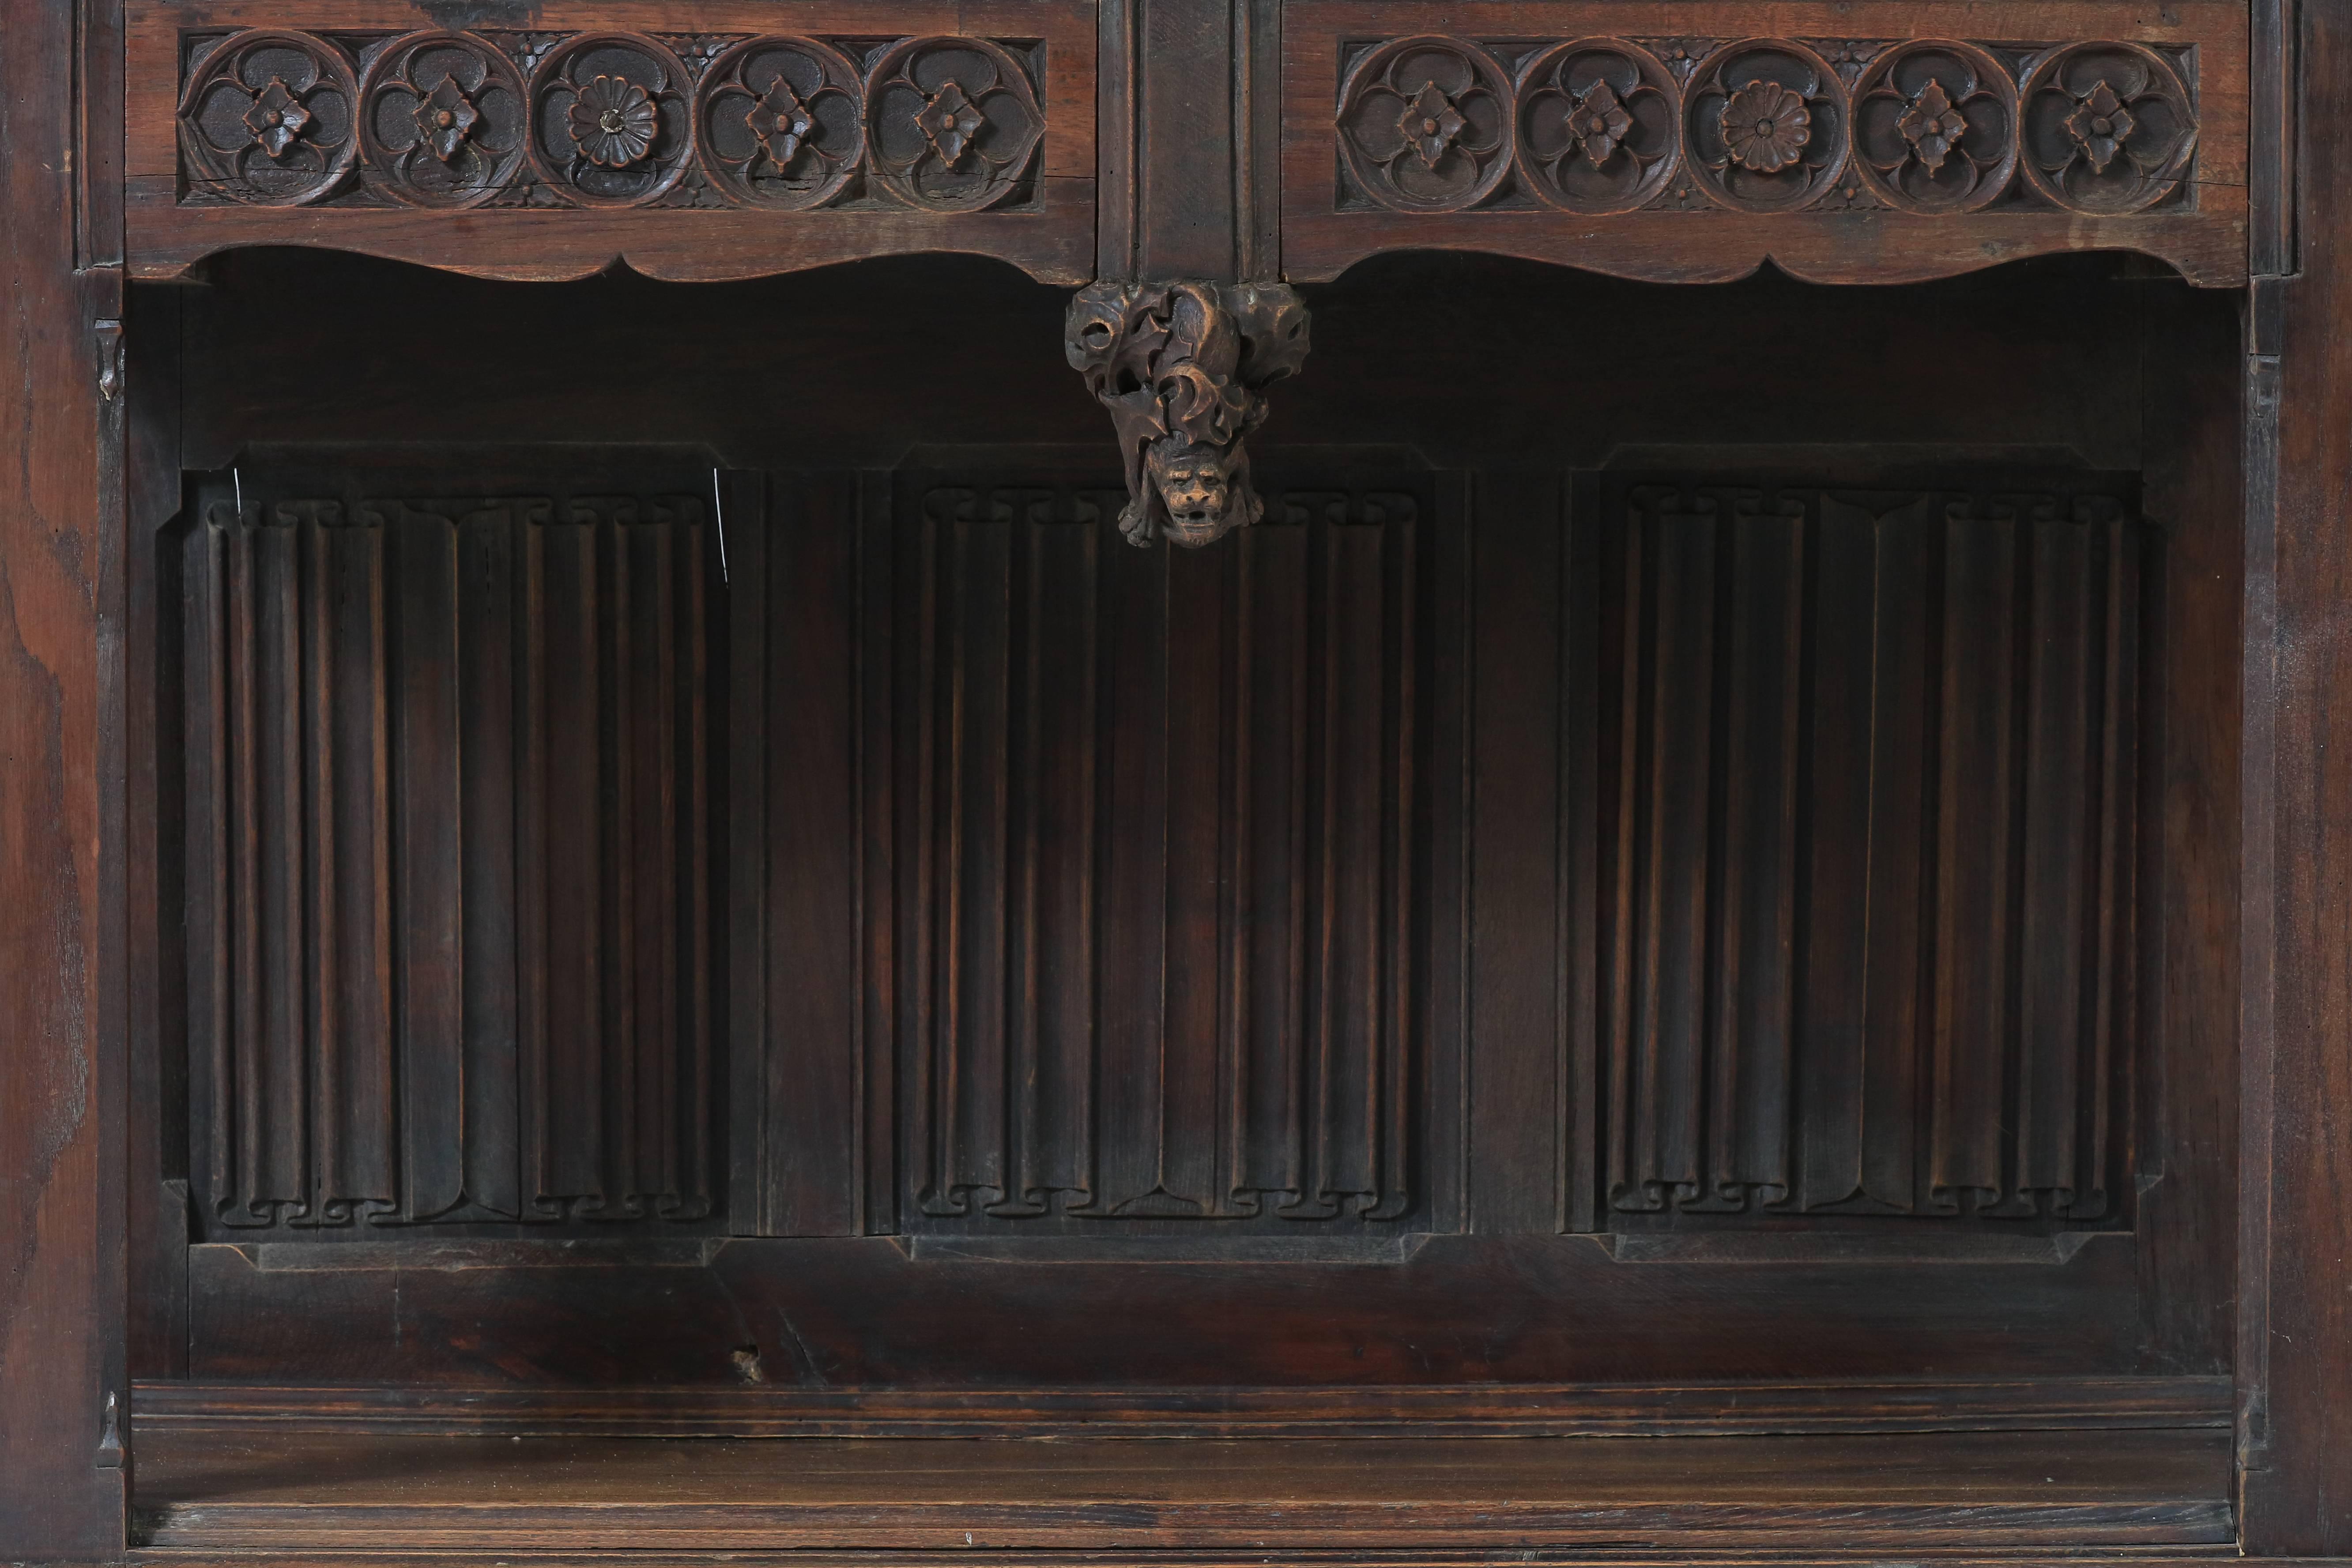 Hand-Carved Gothic Revival Cabinet 19th Century Oak and Wrought Iron